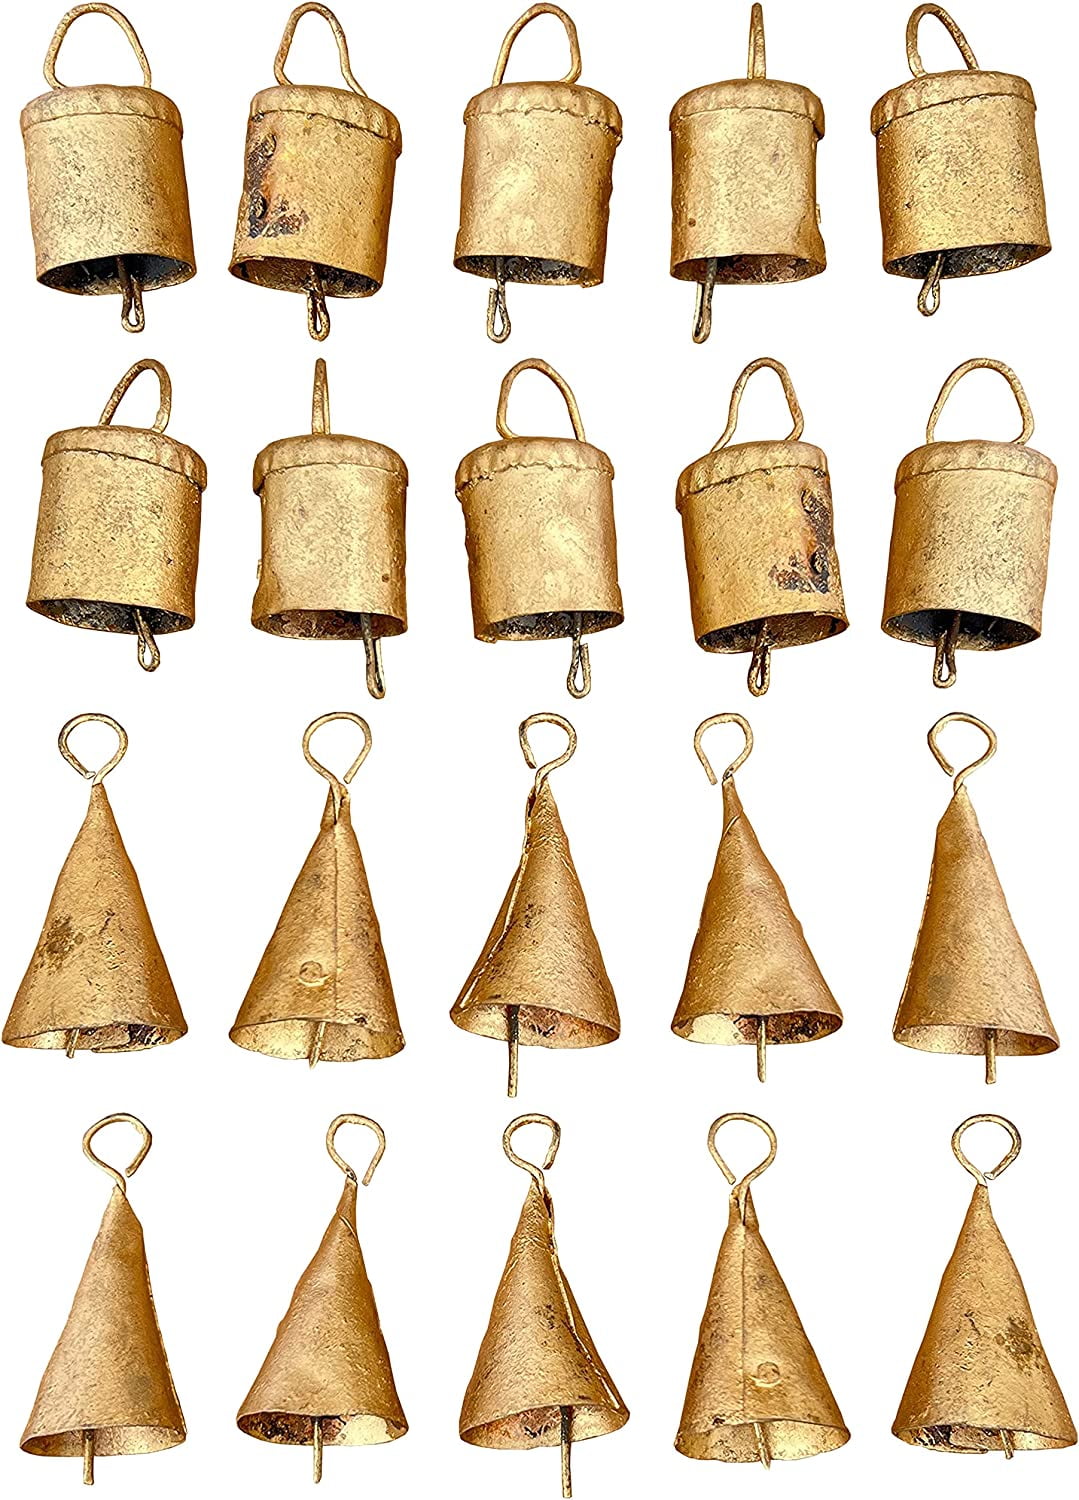 30 Pieces Craft Bells Small Brass Bells for Crafts Mini Vintage Bells with  Spring Hooks Tiny for Hanging Wind Chimes Making Dog Training Doorbell